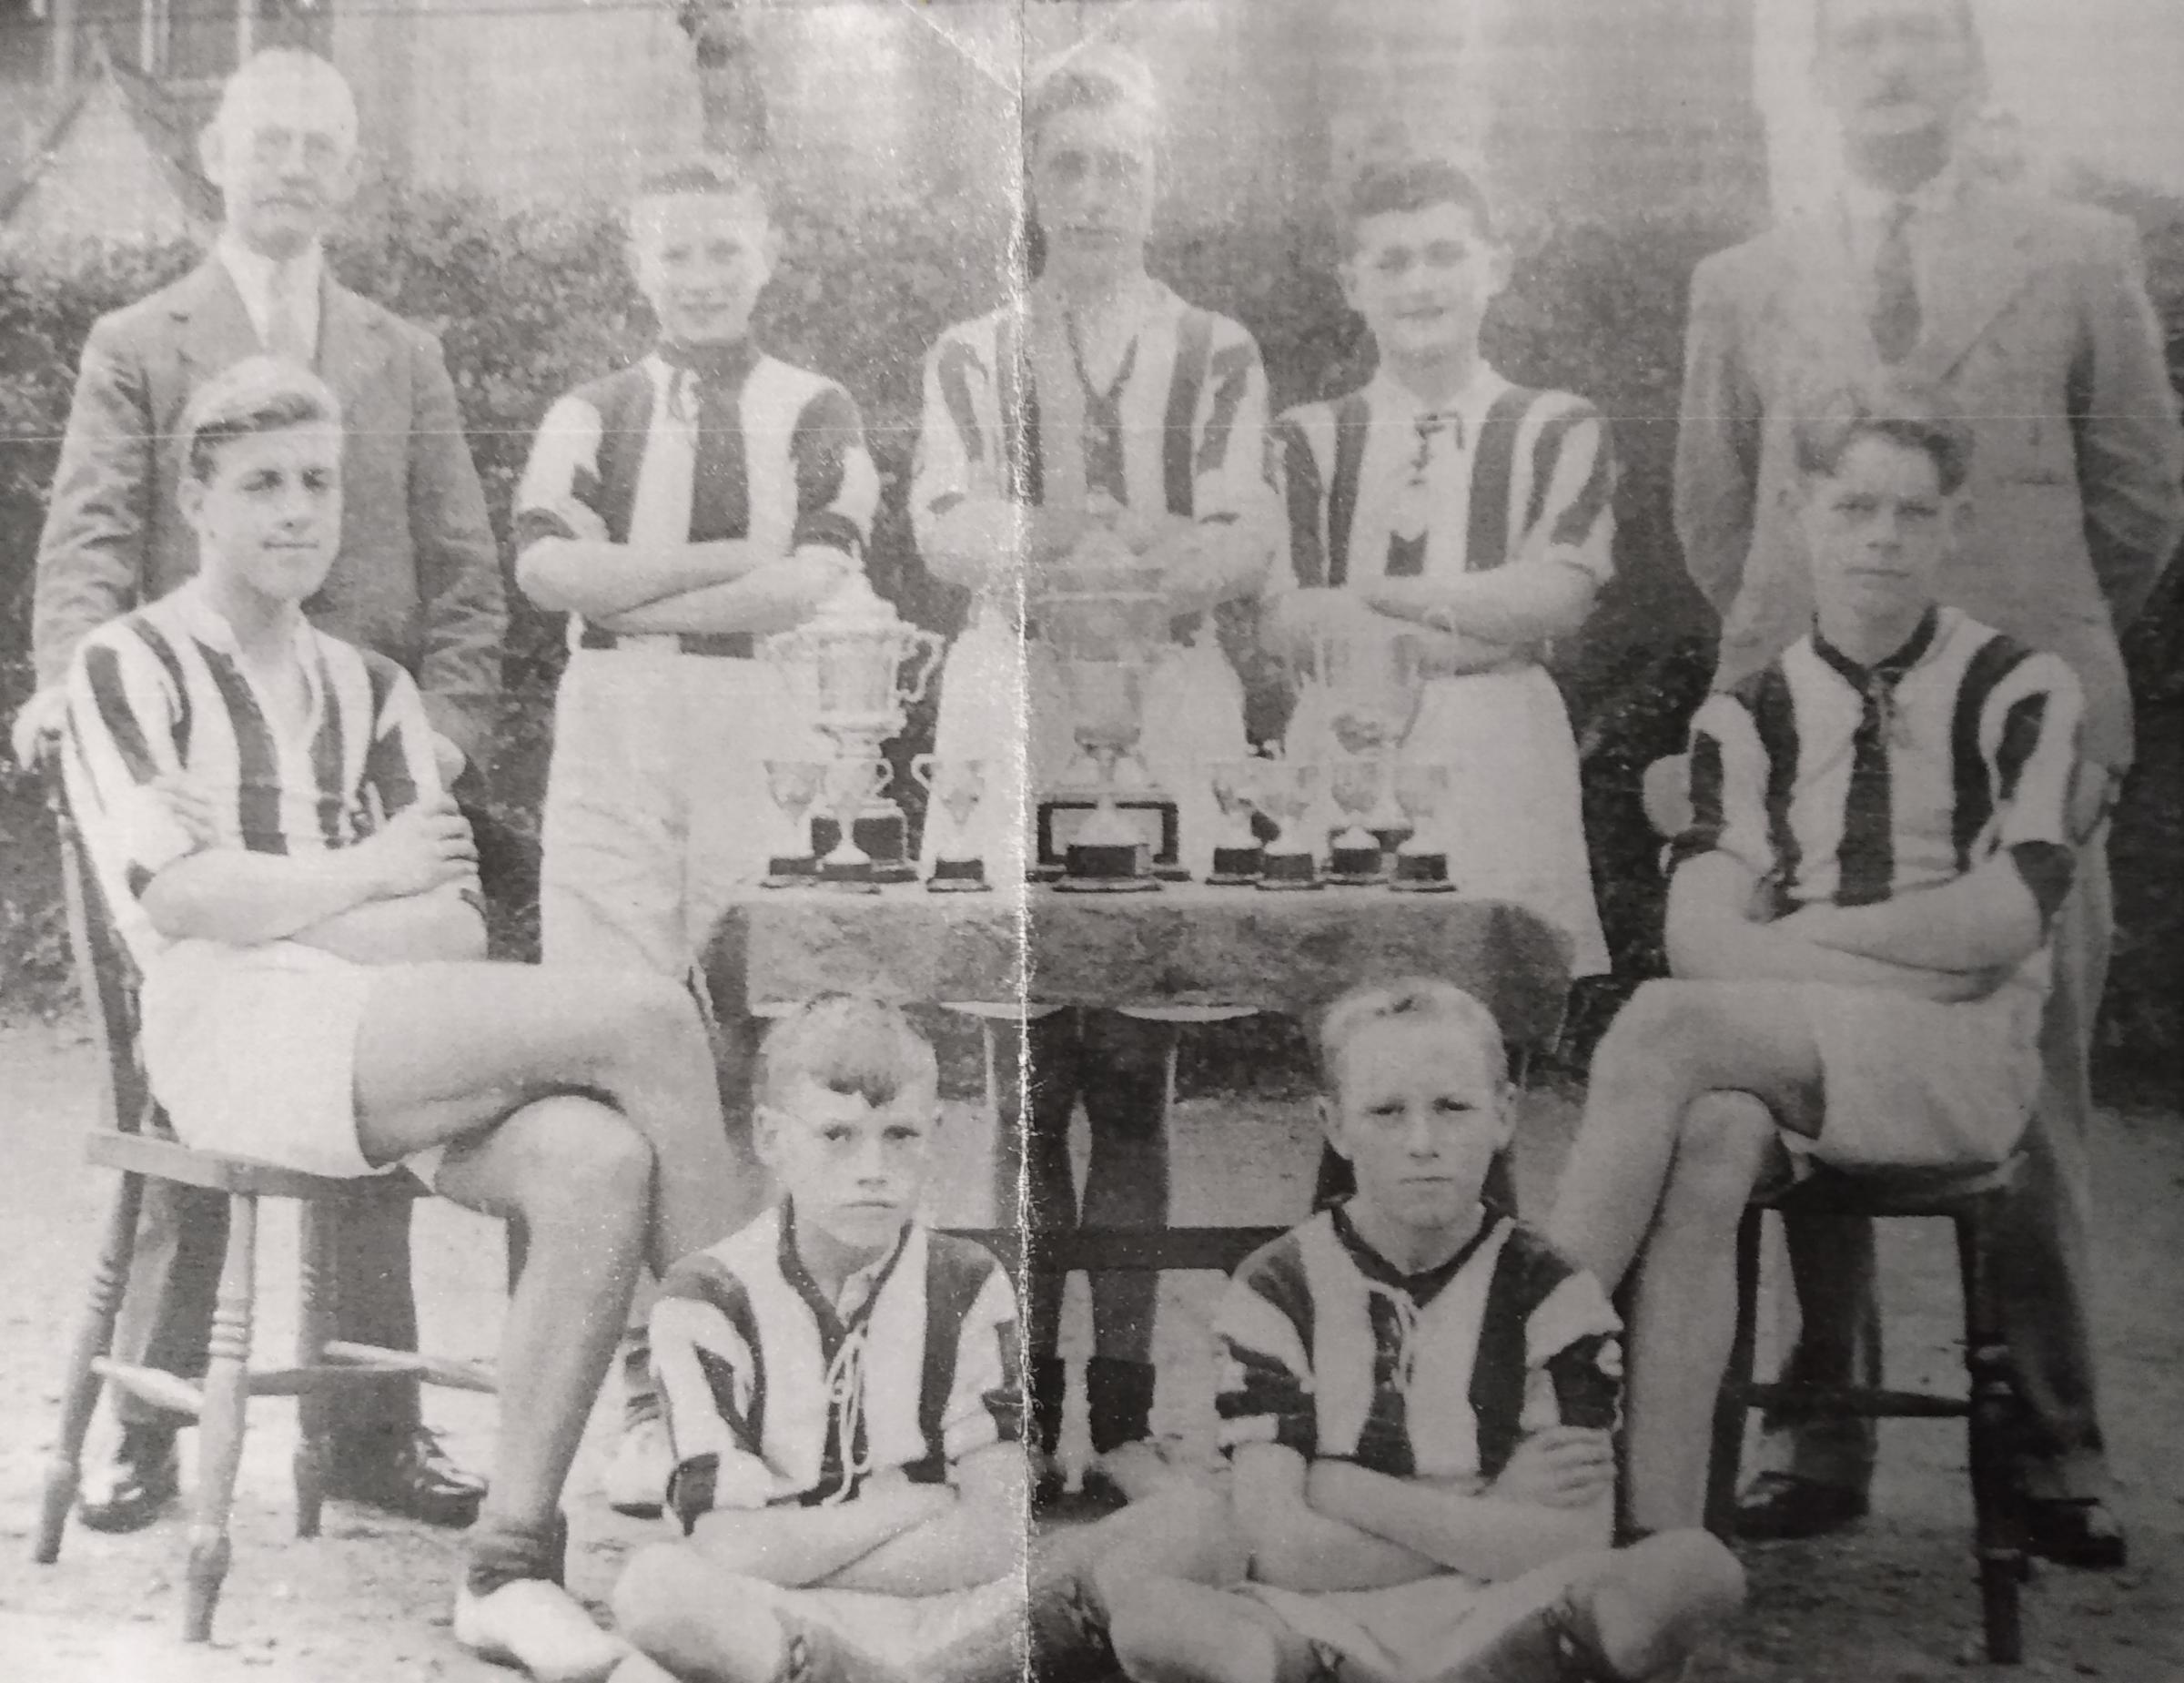 Geoff Hutchinson sent in this picture of the 1936 St Stephen’s Boys School runners